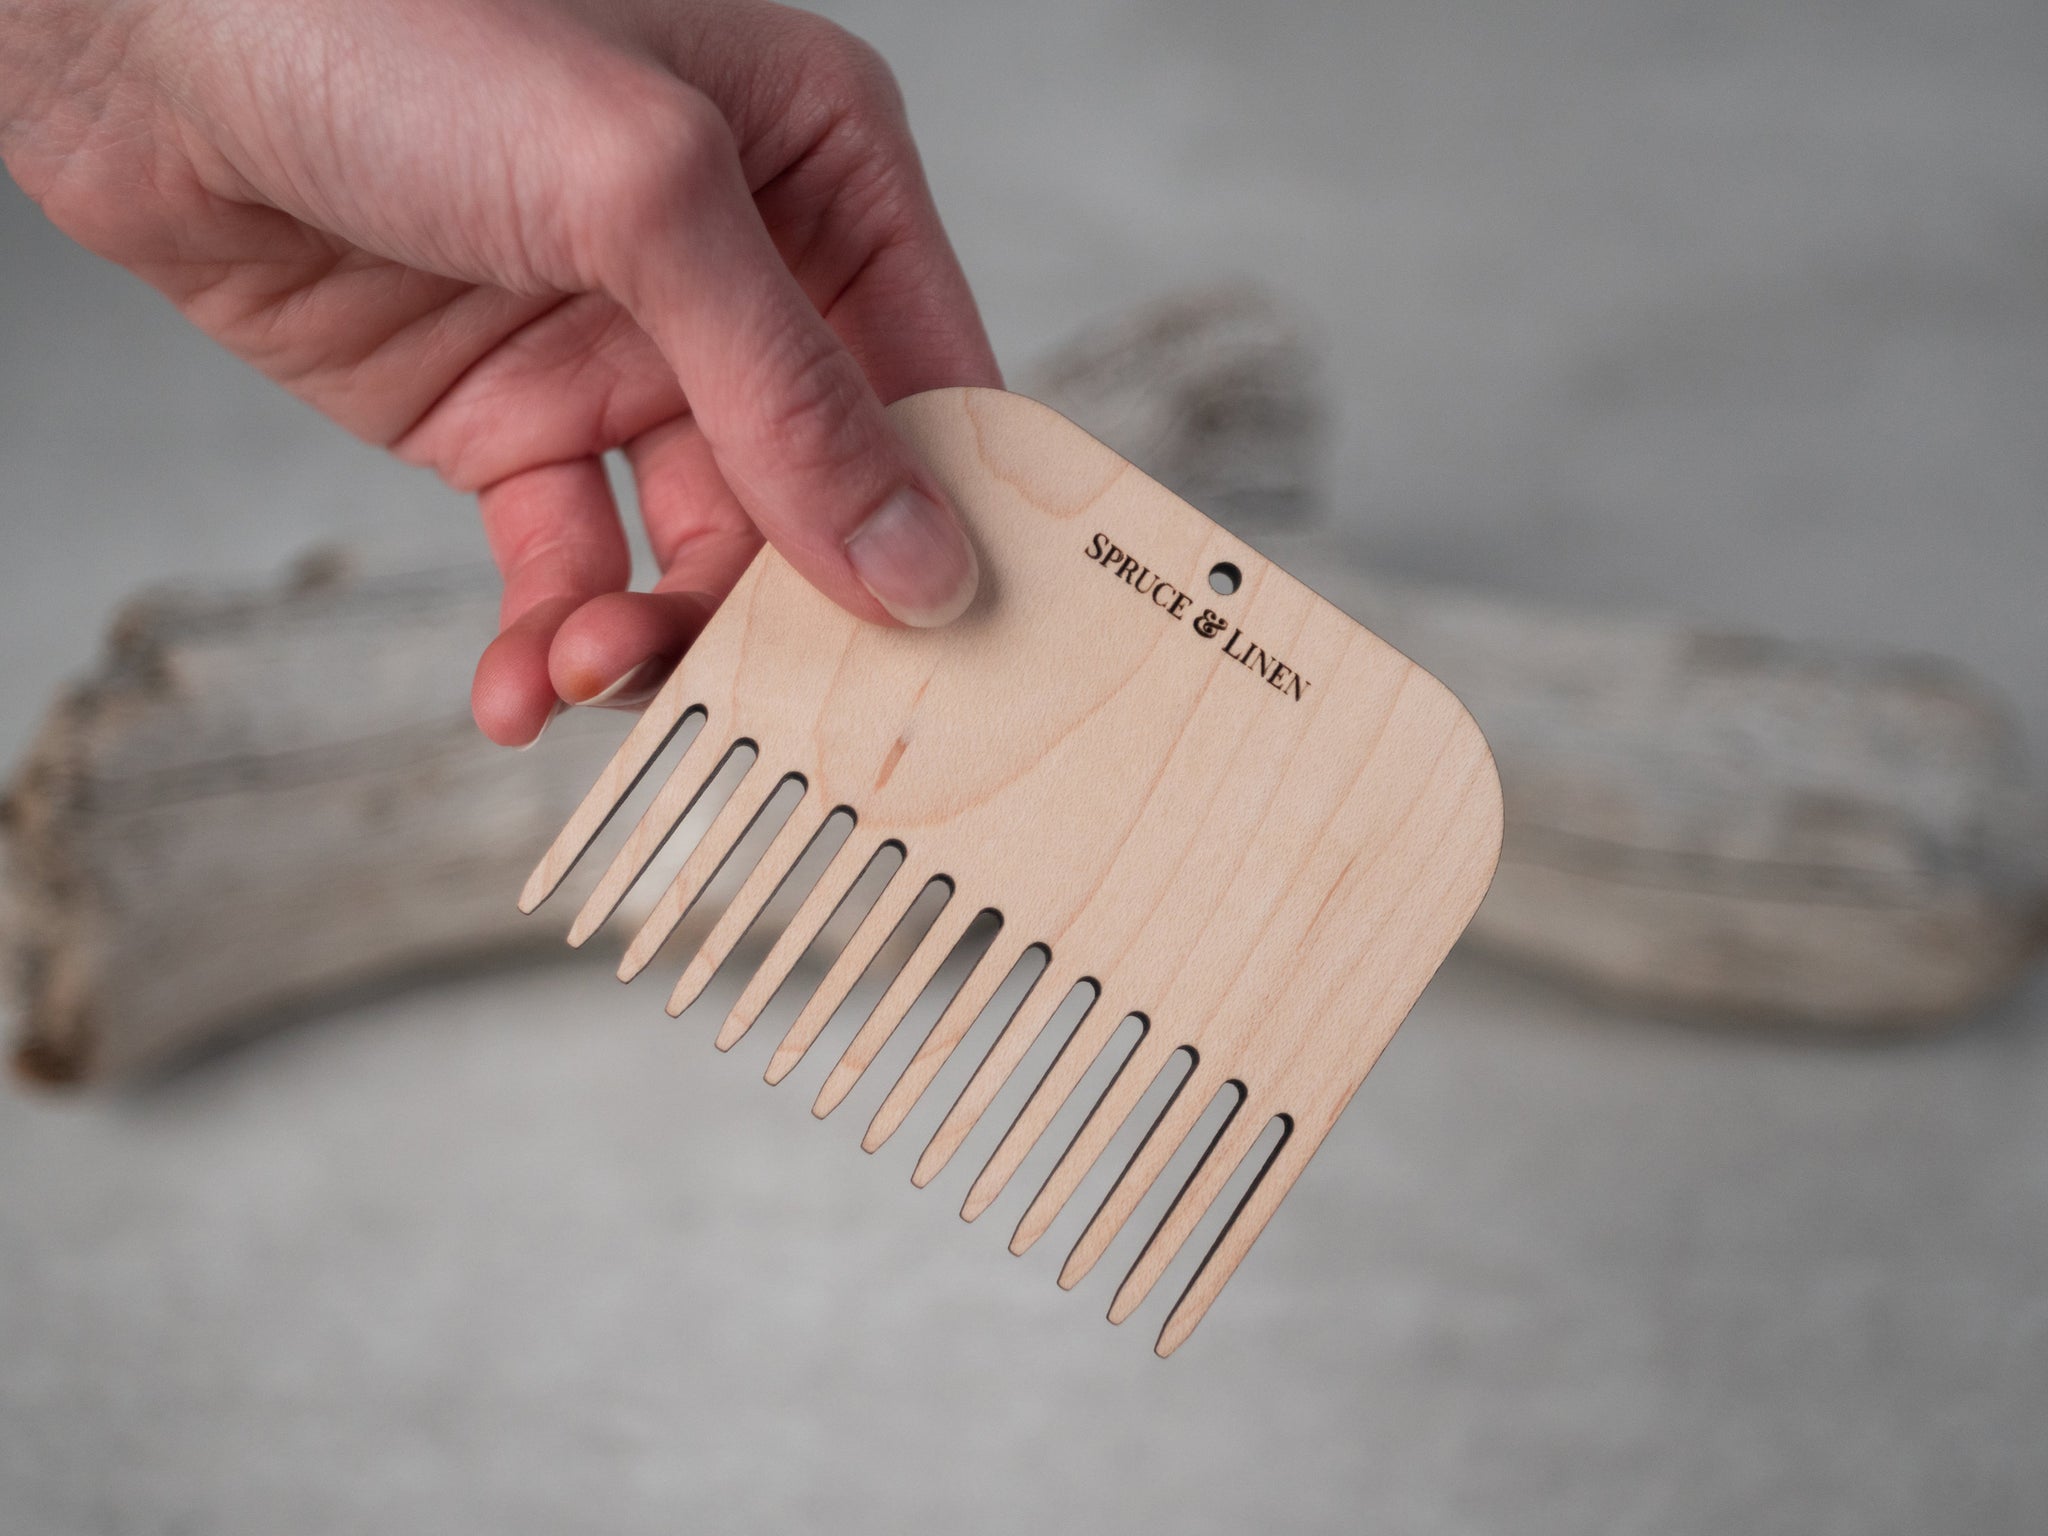 Weaving Combs From Purl and Loop